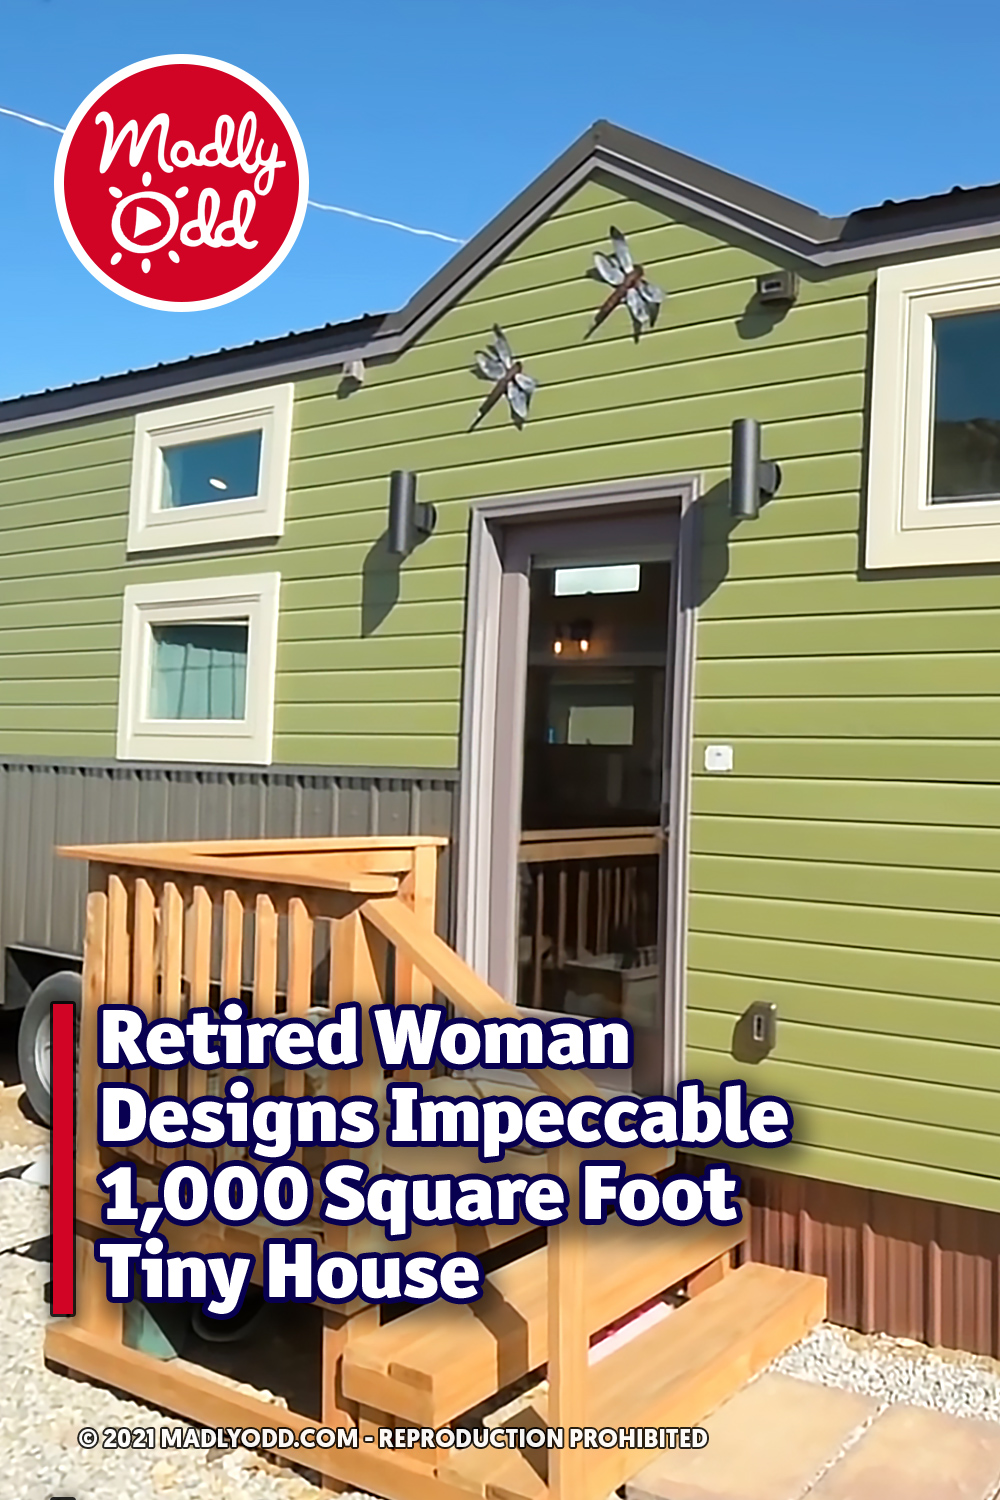 Retired Woman Designs Impeccable 1,000 Square Foot Tiny House